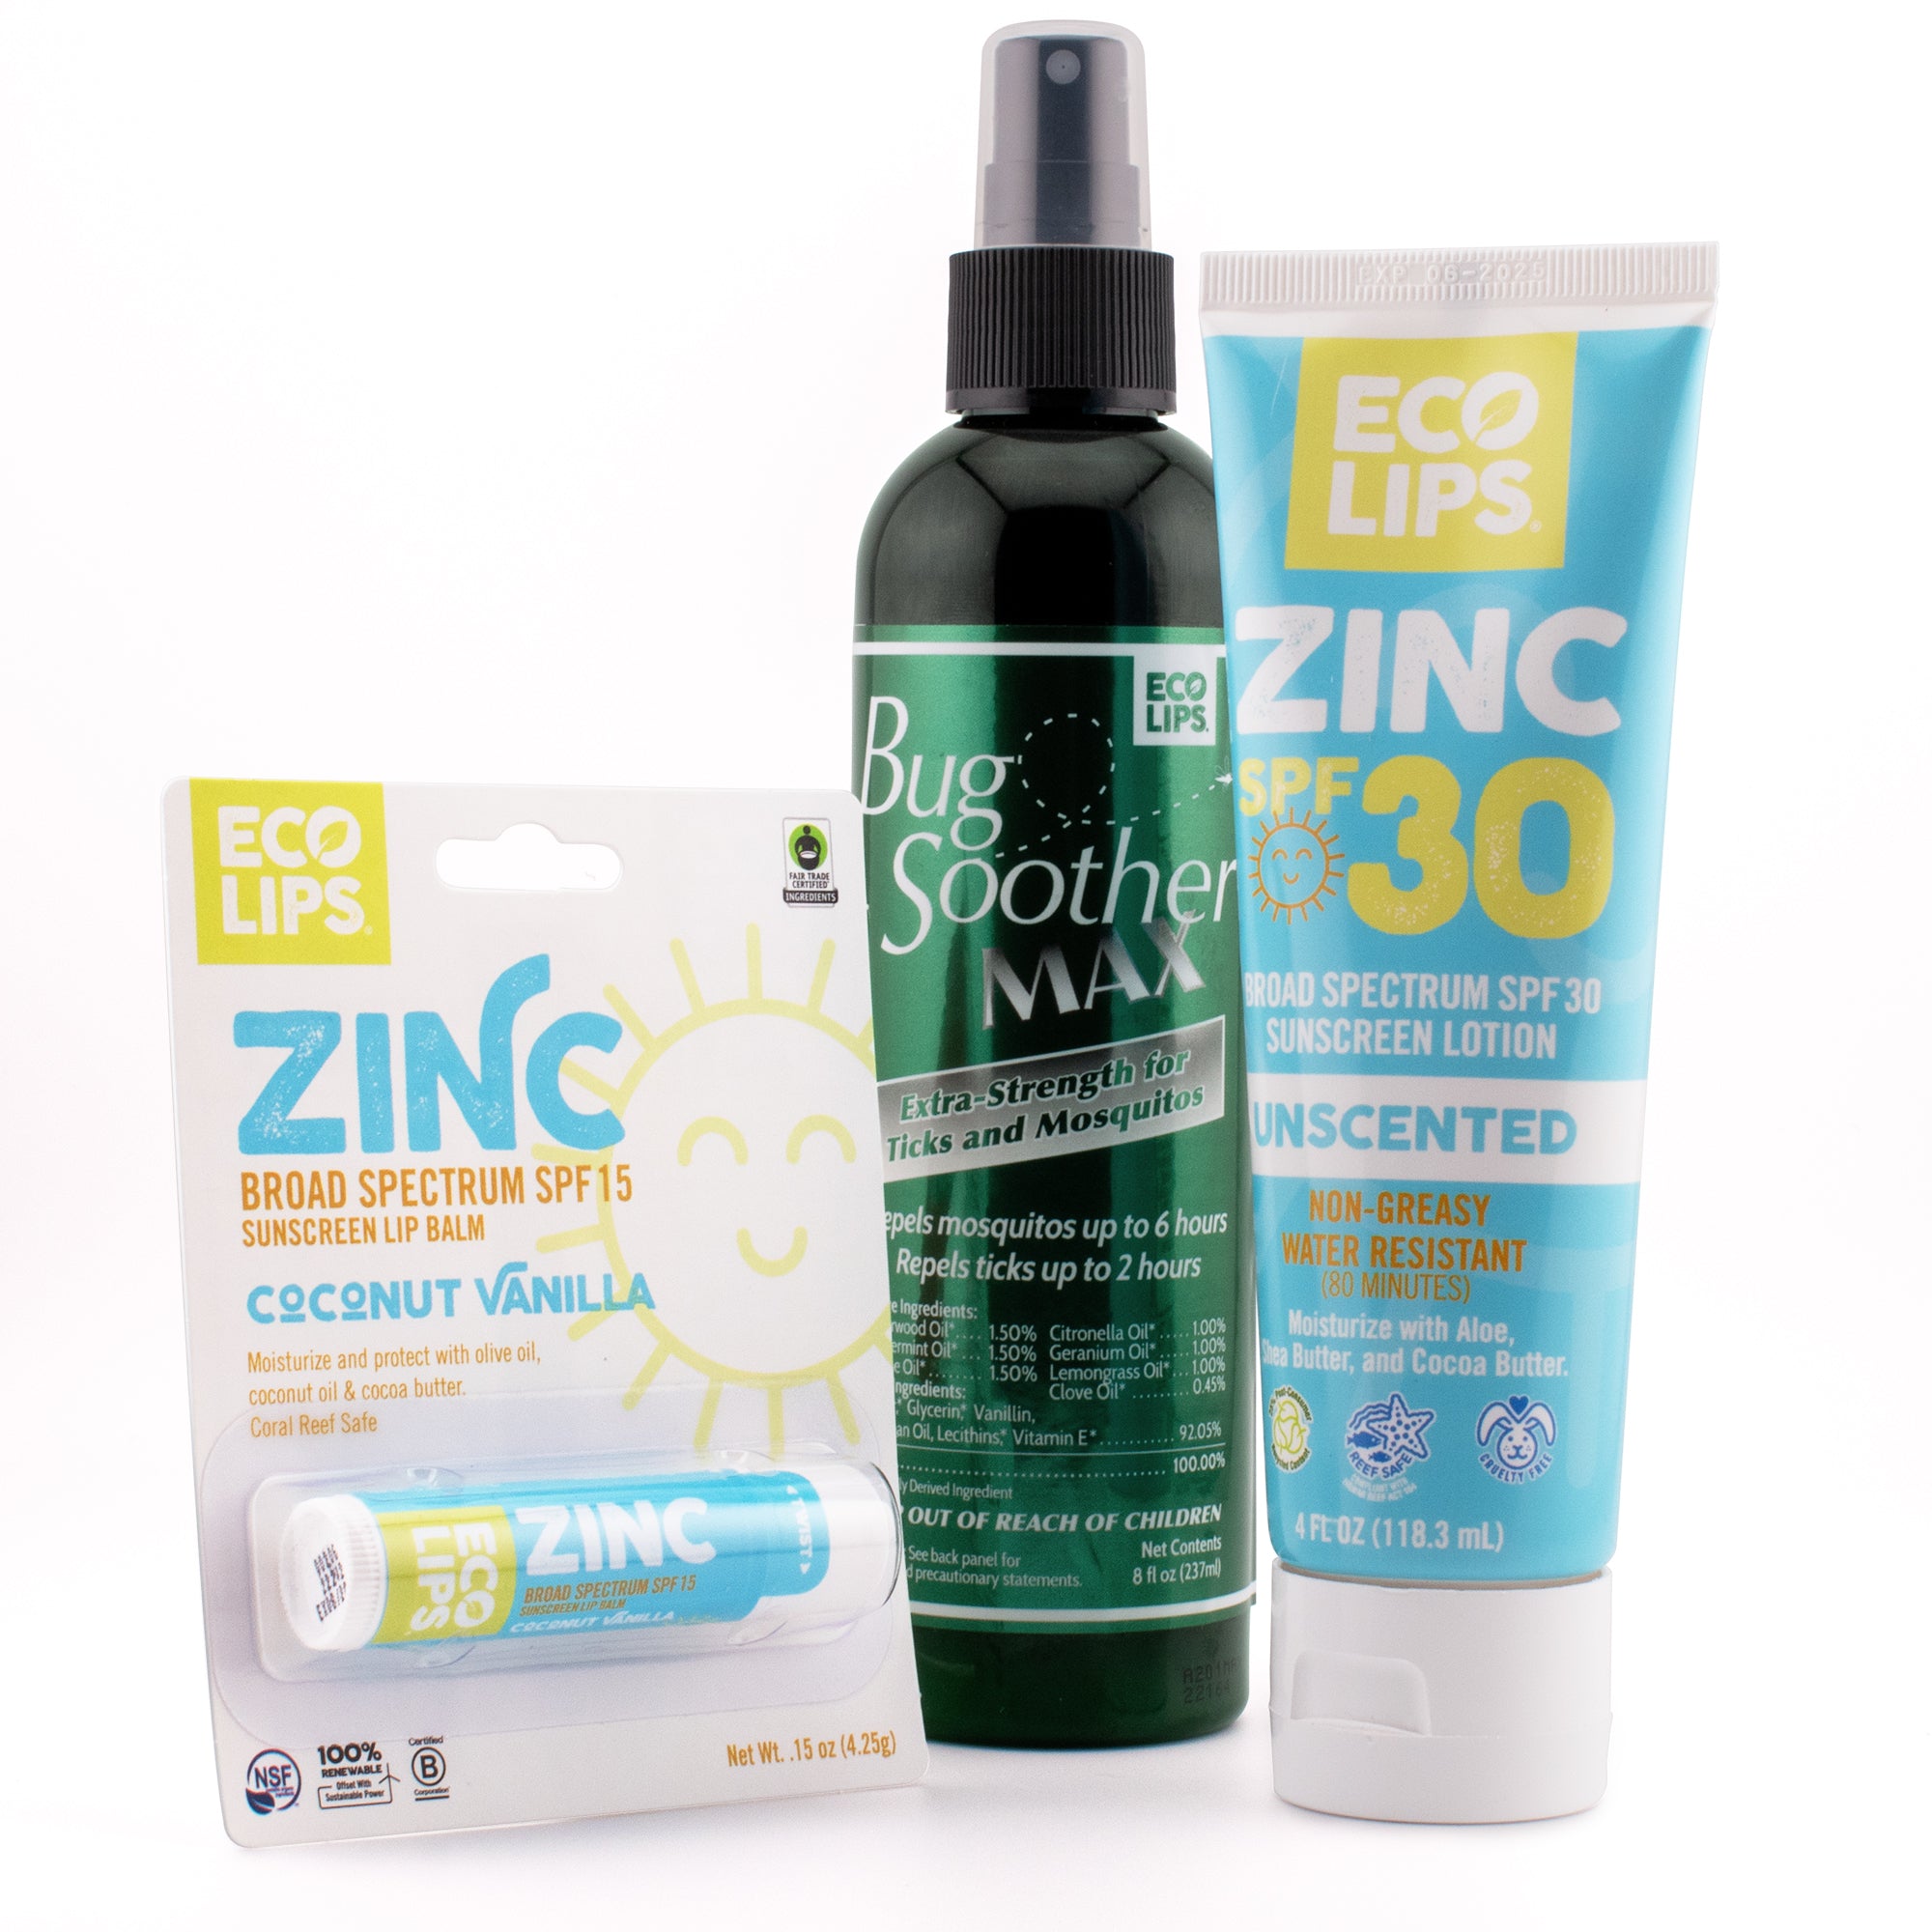 Outdoor Essentials 3-pack - Bug Soother Tick & Mosquito Repellent, SPF 30 Sunscreen Lotion and Zinc SPF 15 Lip Balm